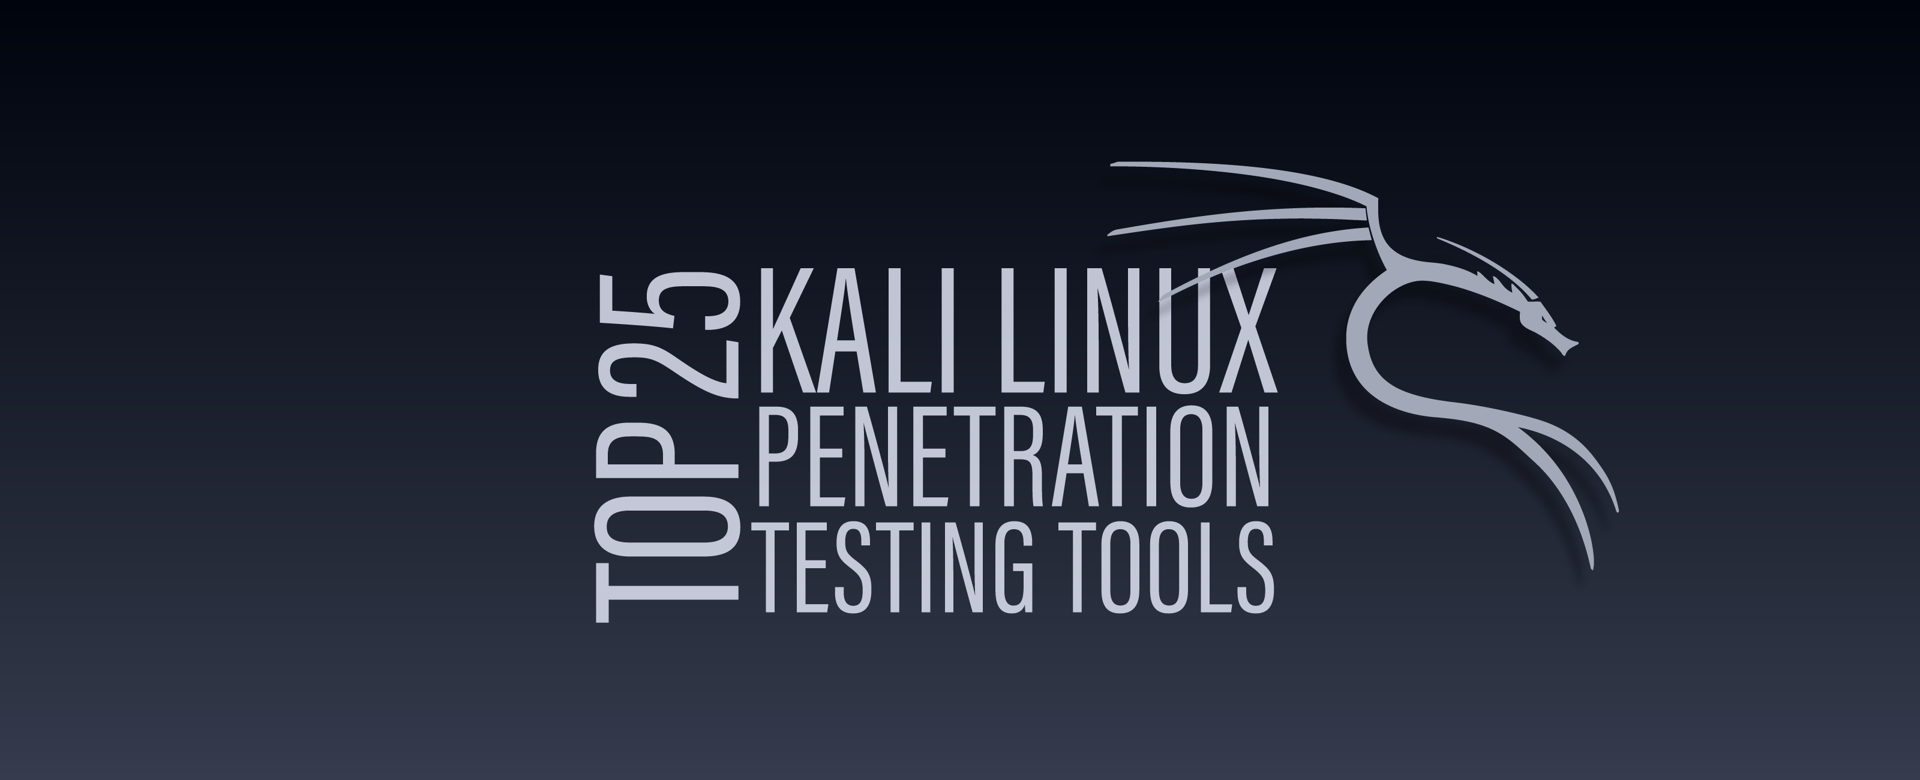 Top 25 Kali Linux Tools Ethical and Penetration Testing